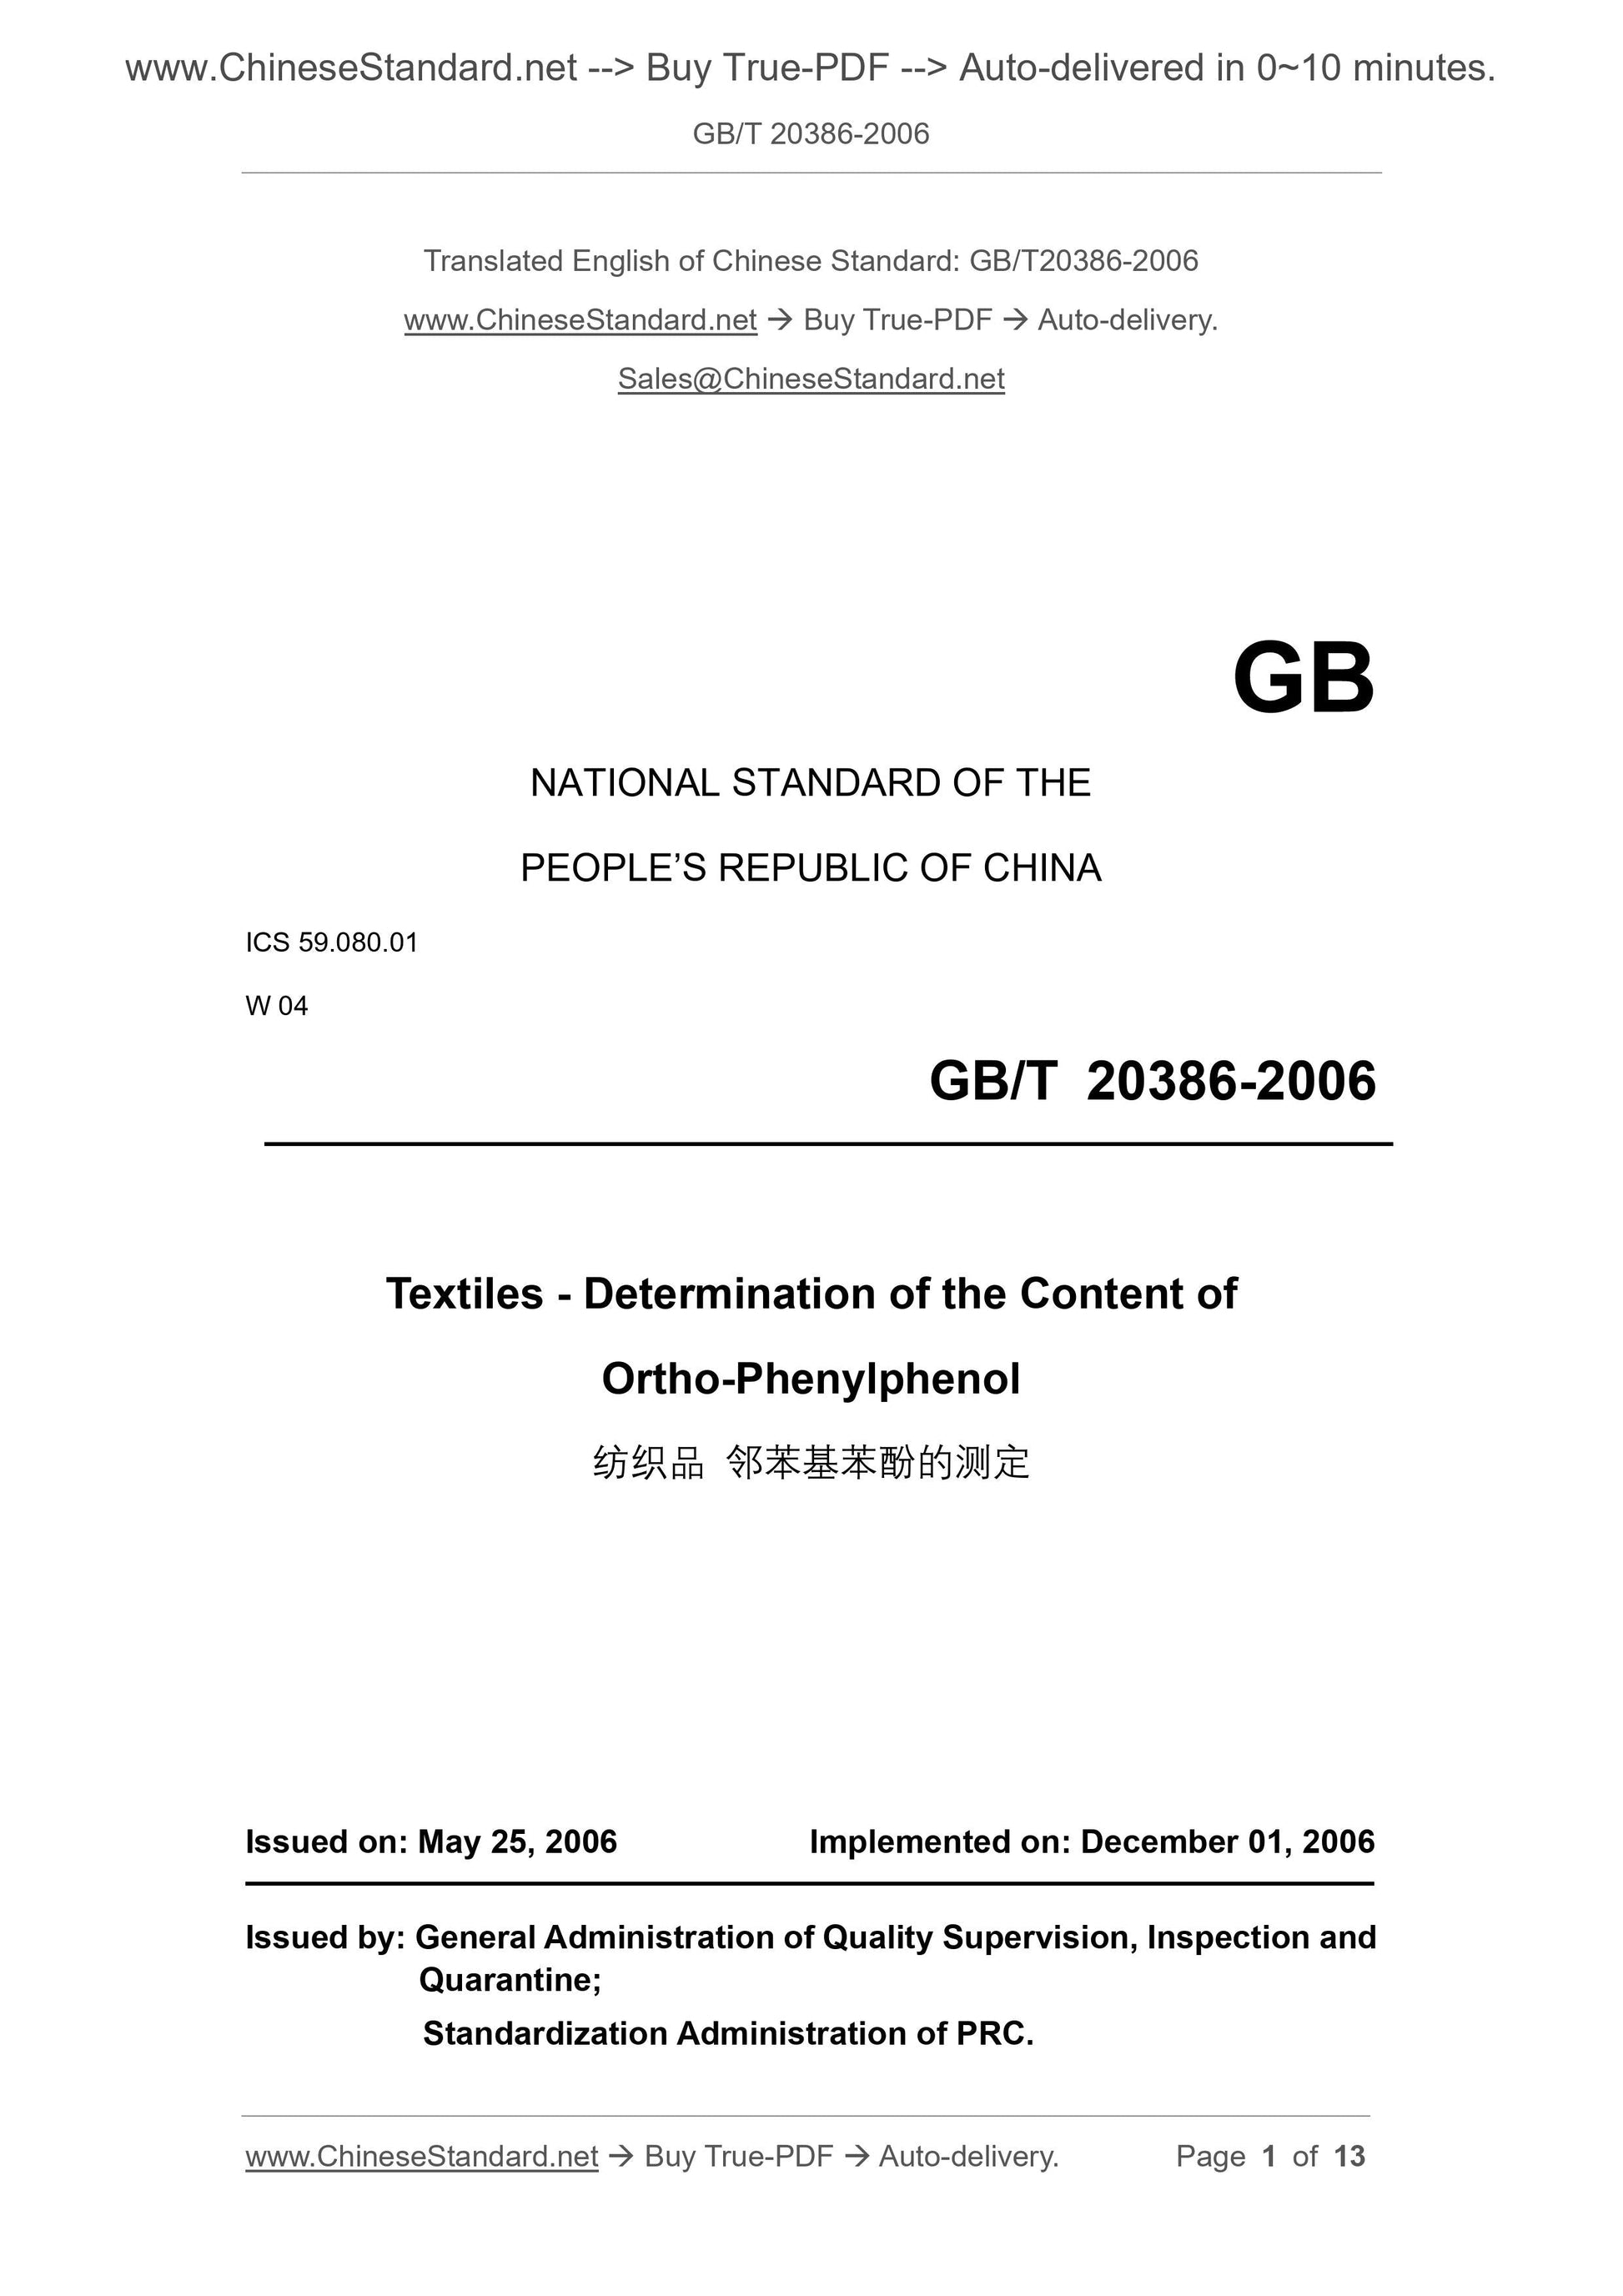 GB/T 20386-2006 Page 1